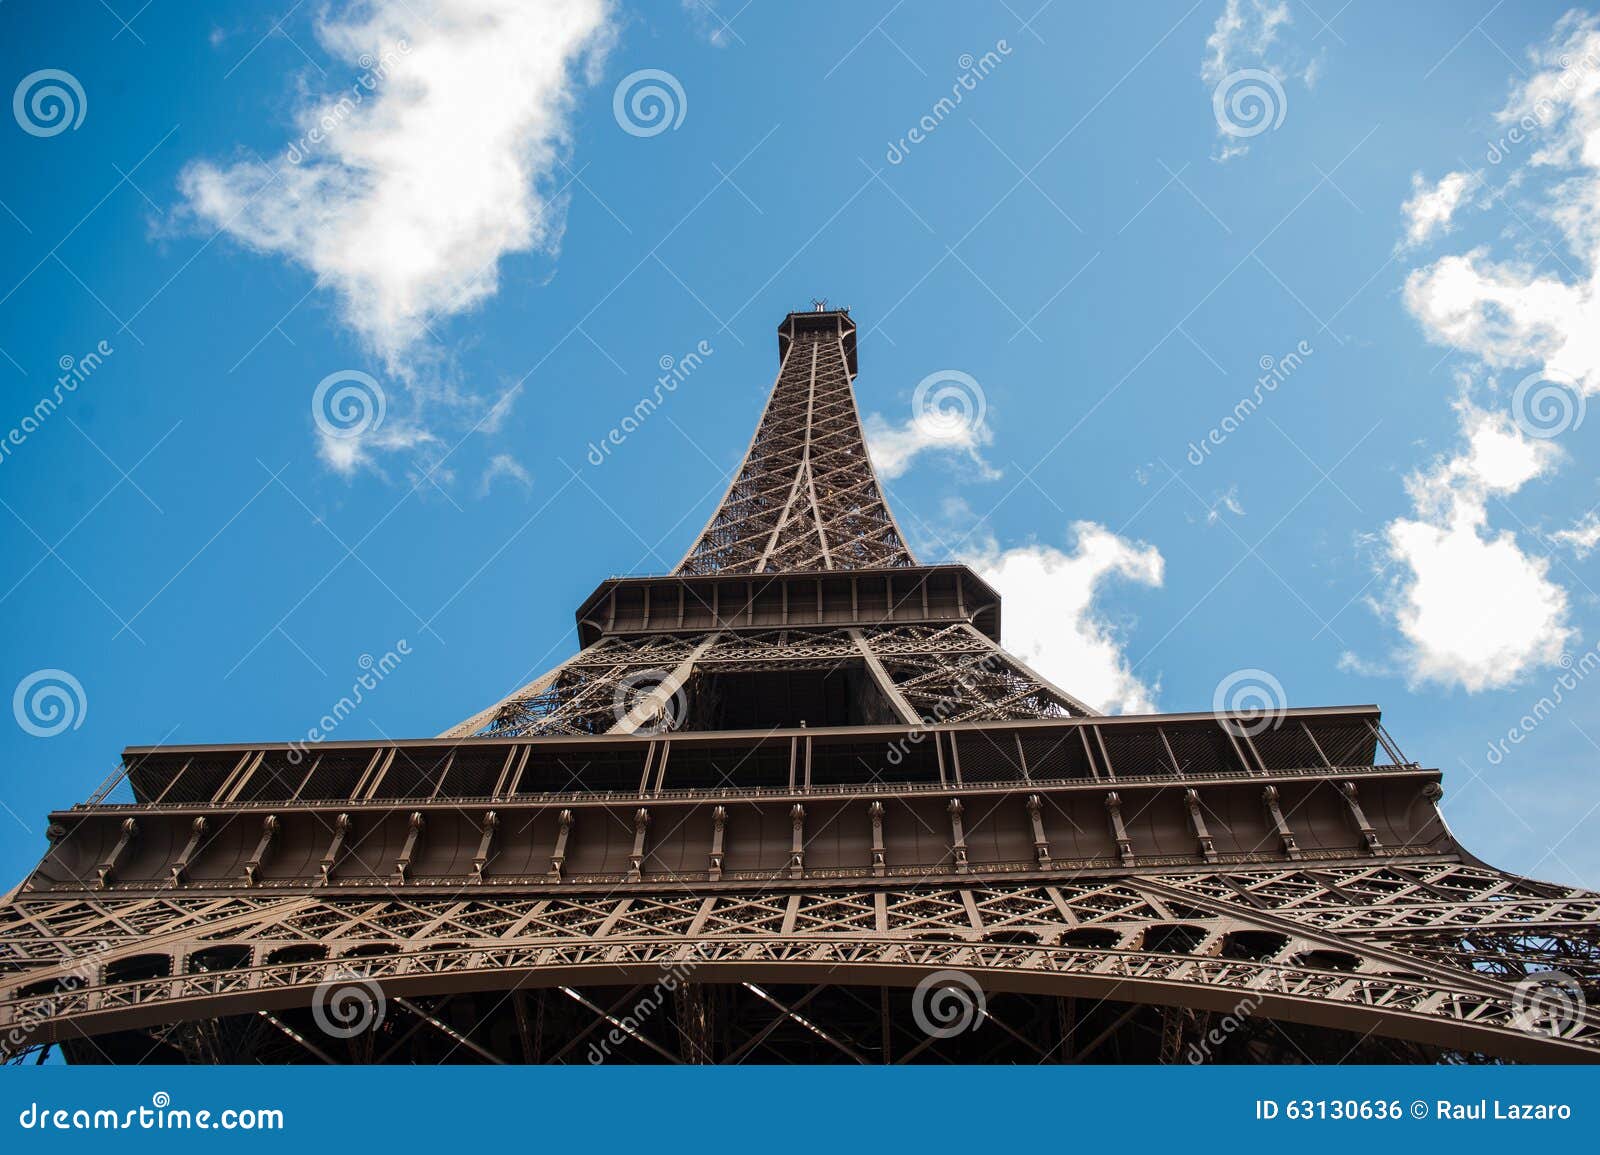 angle view of eiffiel tower